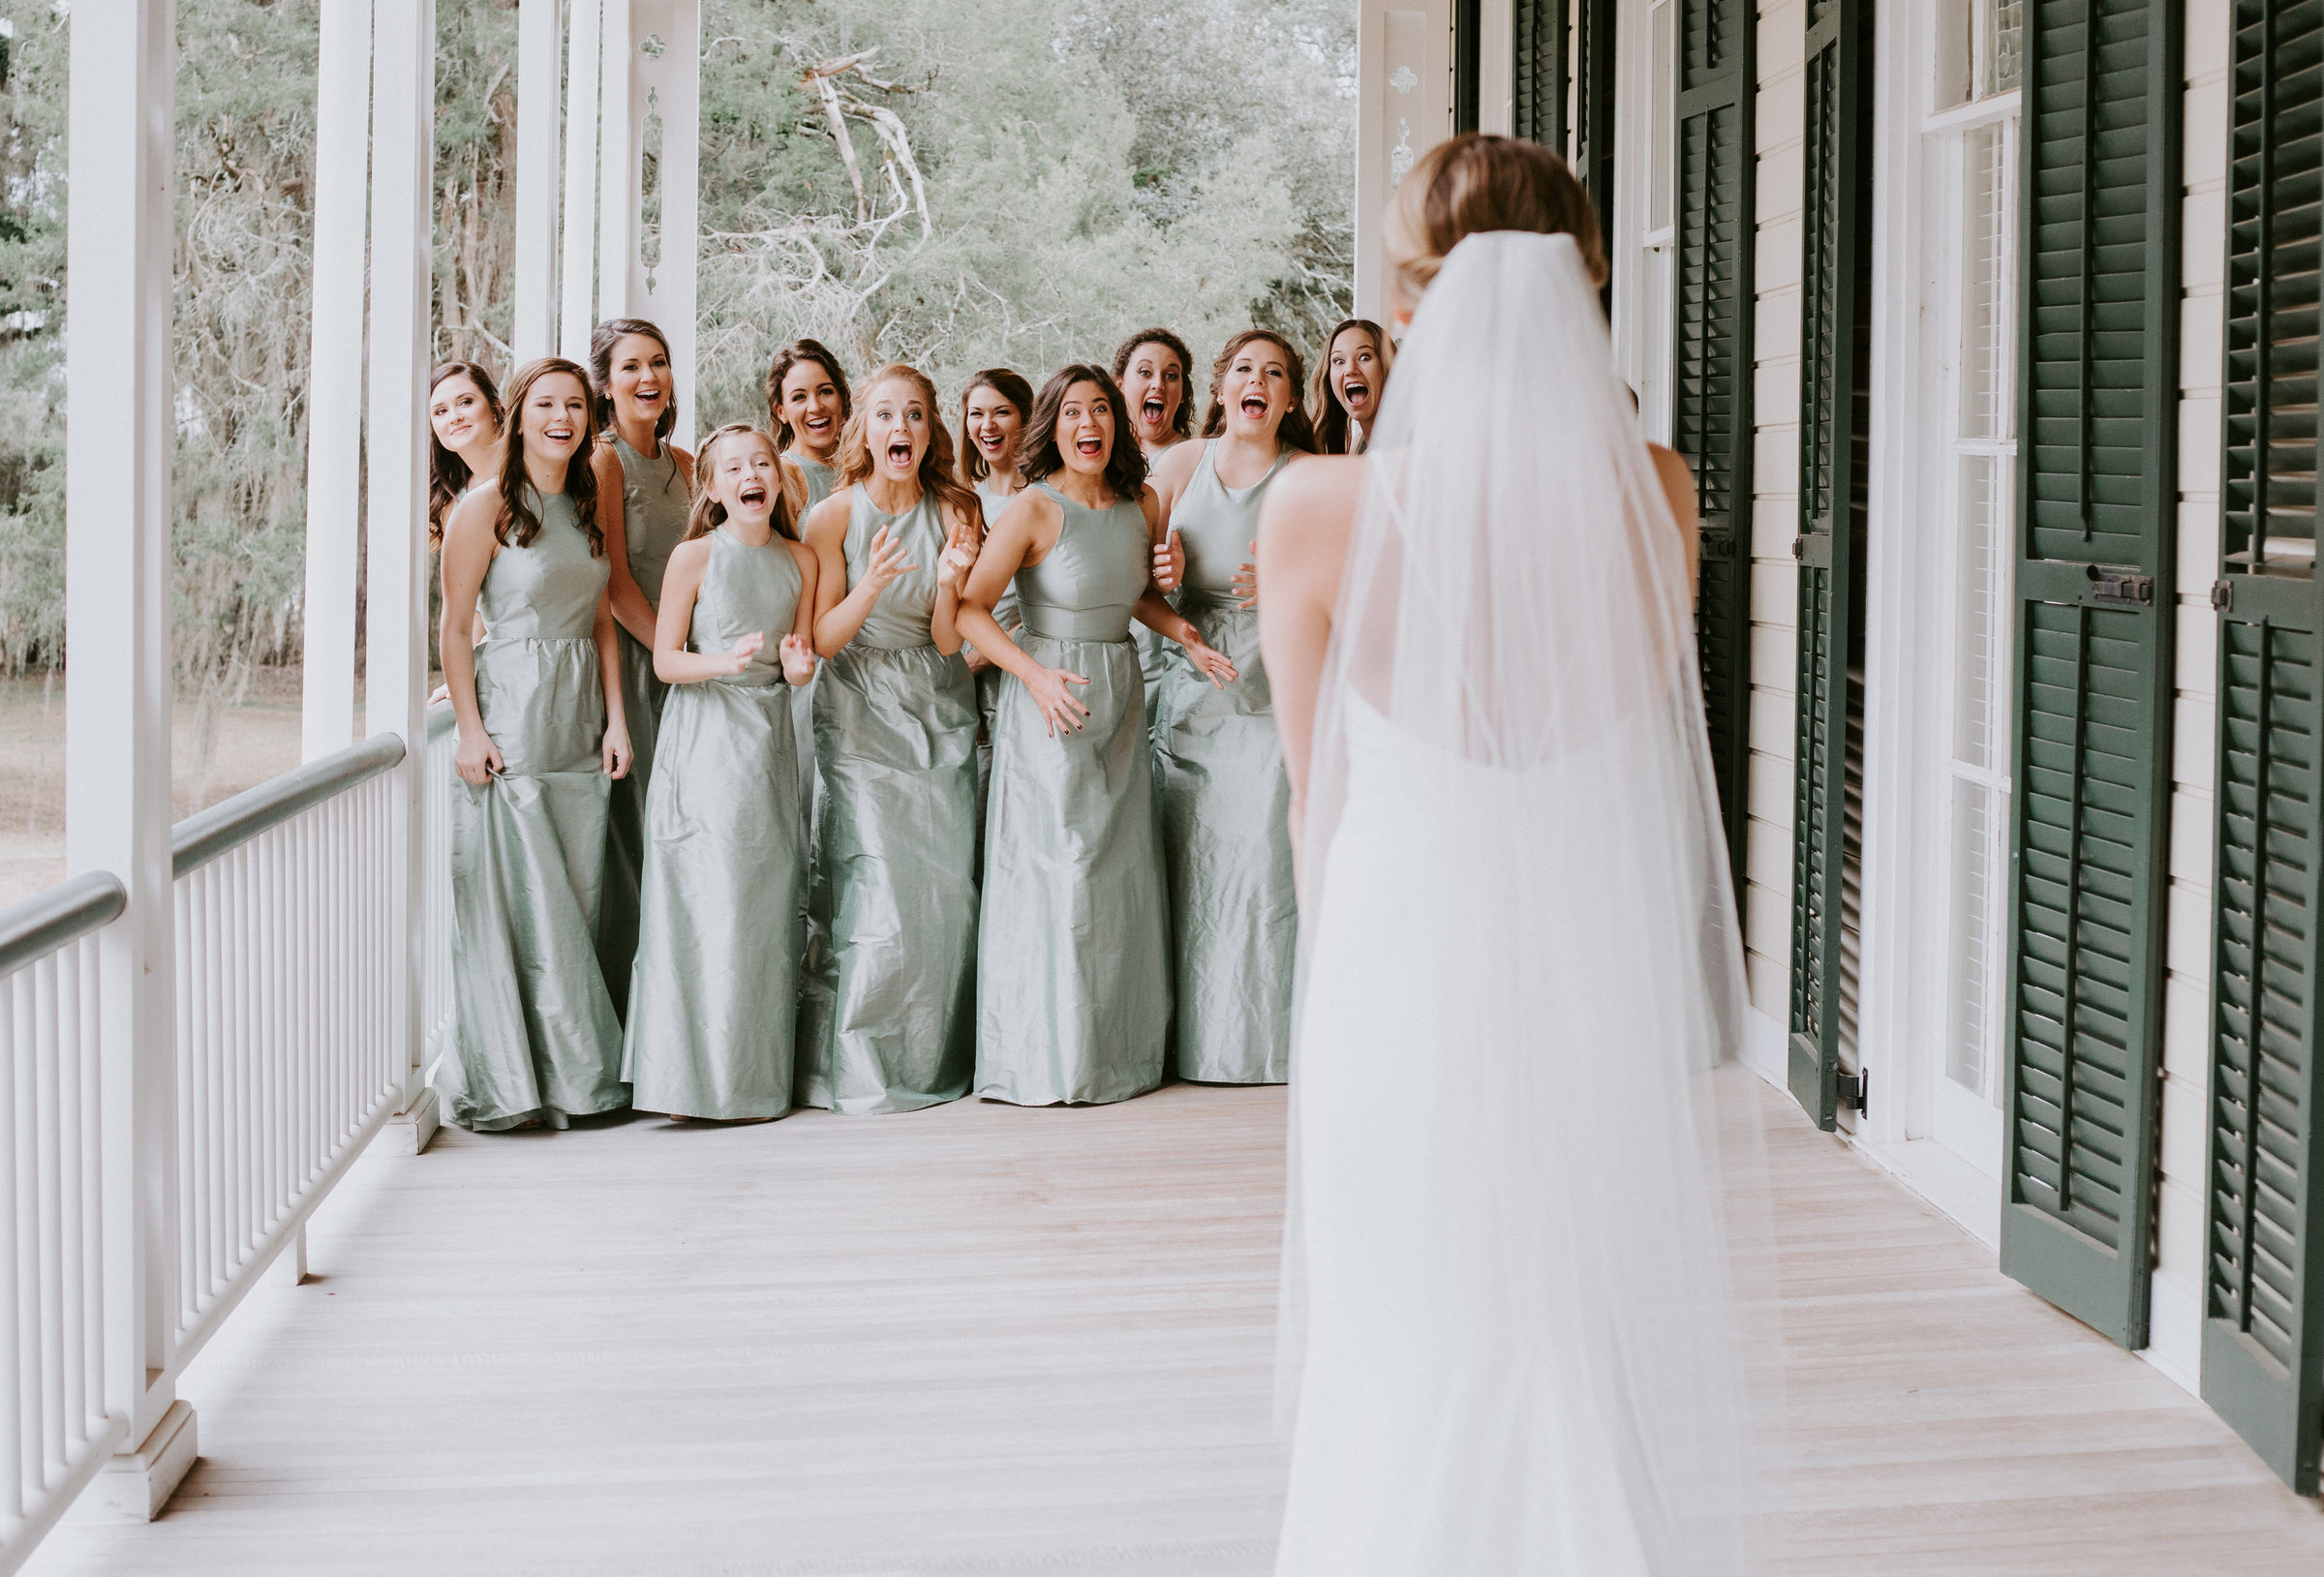 brides first look with her bridesmaids on her wedding day in savannah georgia